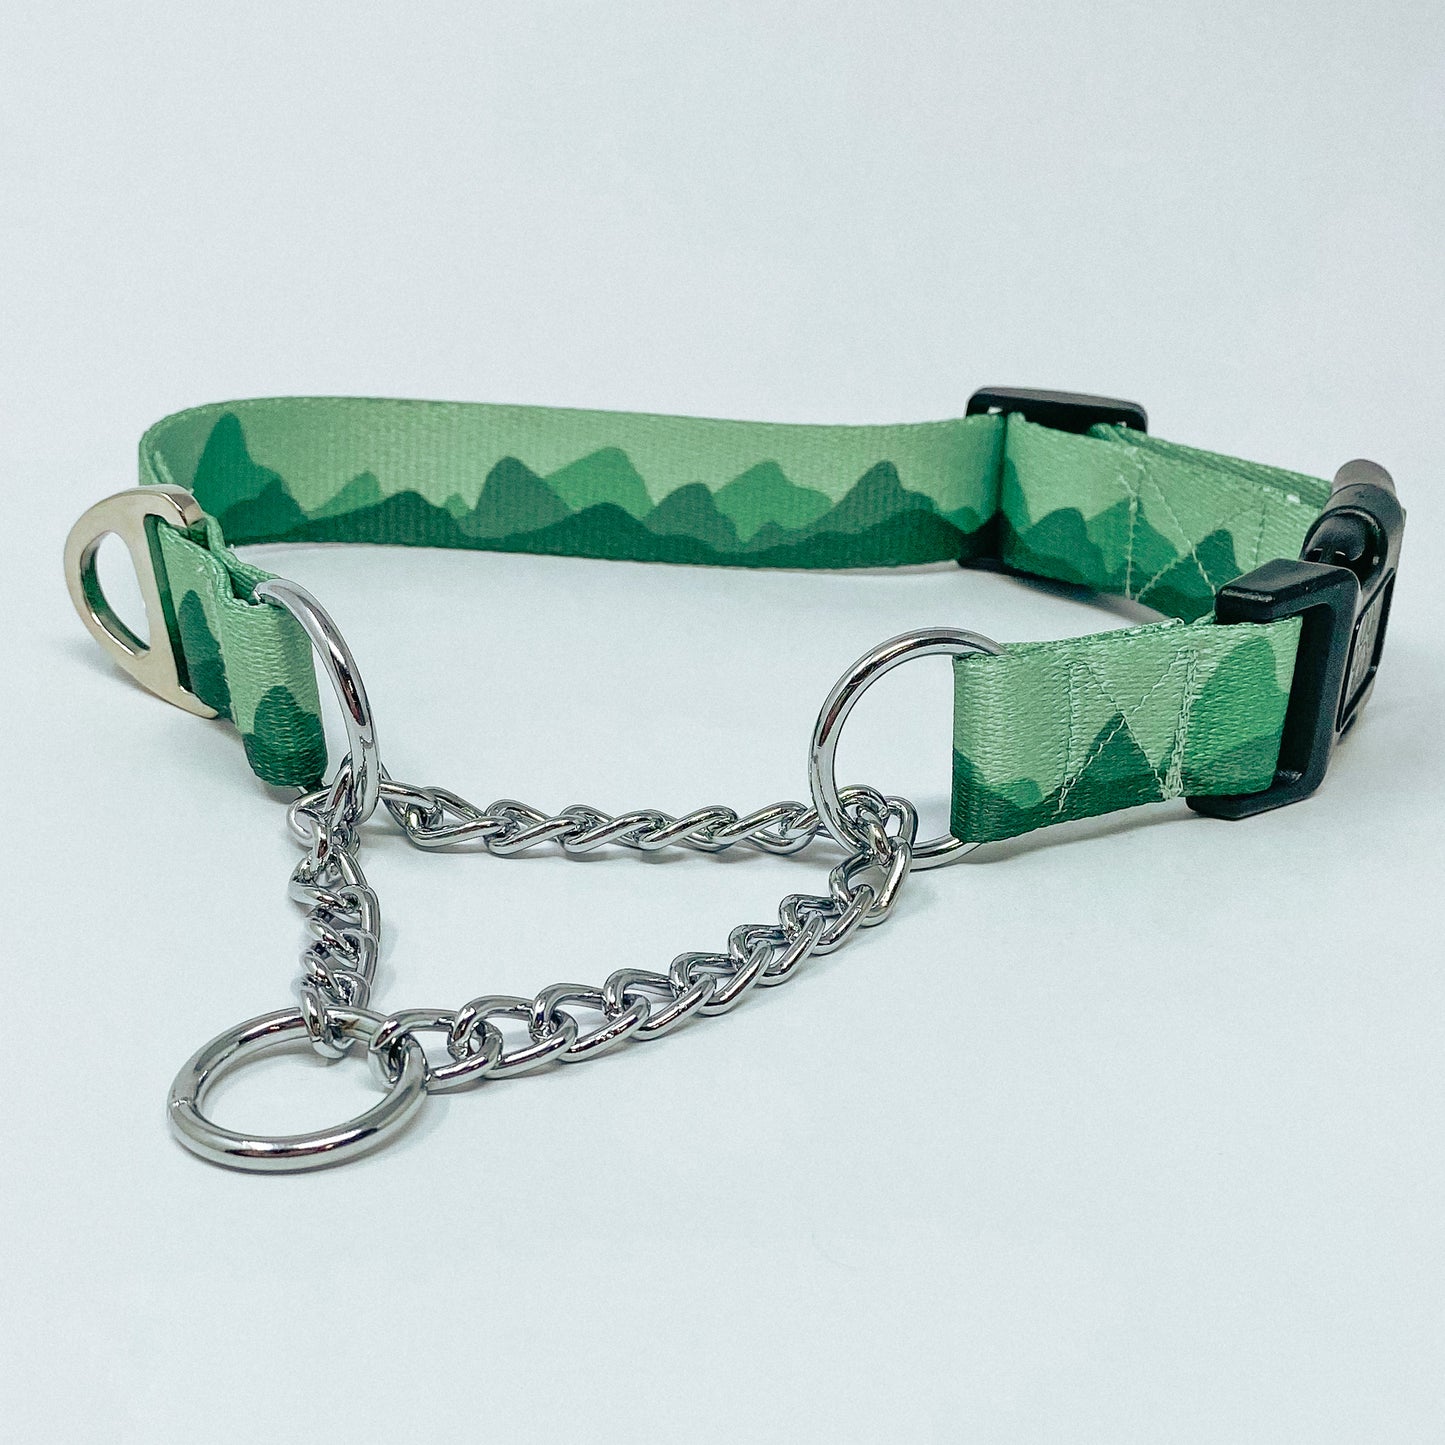 Summit Recycled Martingale Dog Collar